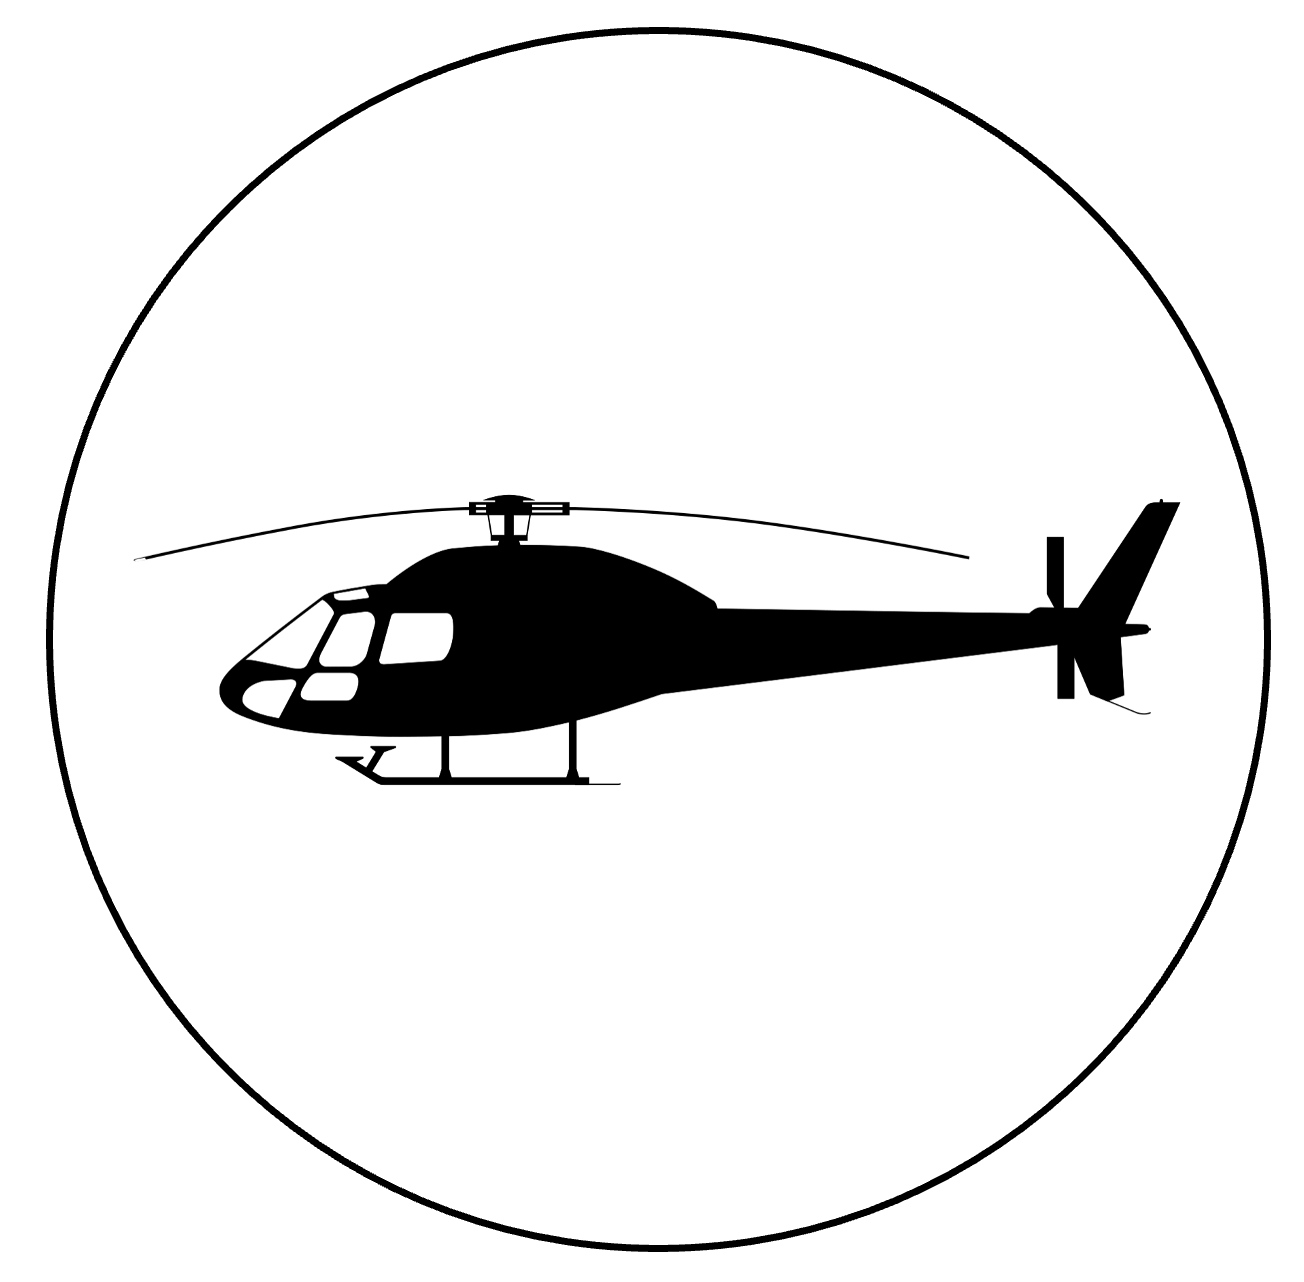 Nuisance Helicopters